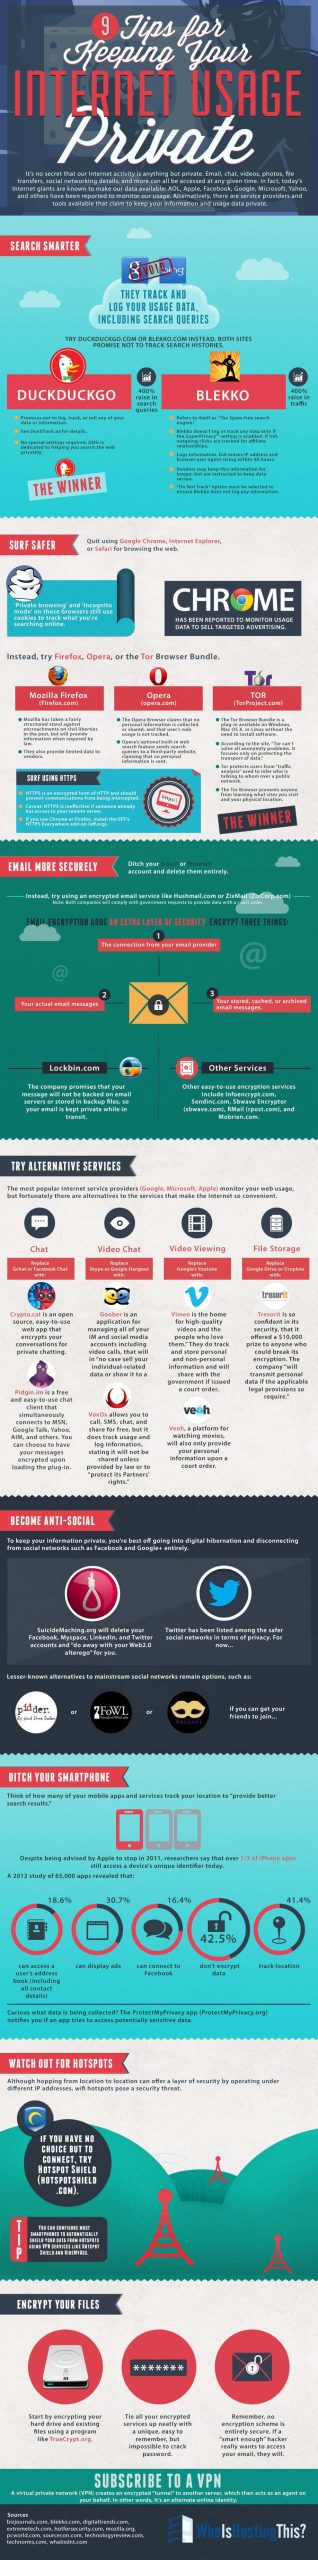 9 Tips for Keeping Your Internet Usage Private [Infographic] by Who Is Hosting This: The Blog